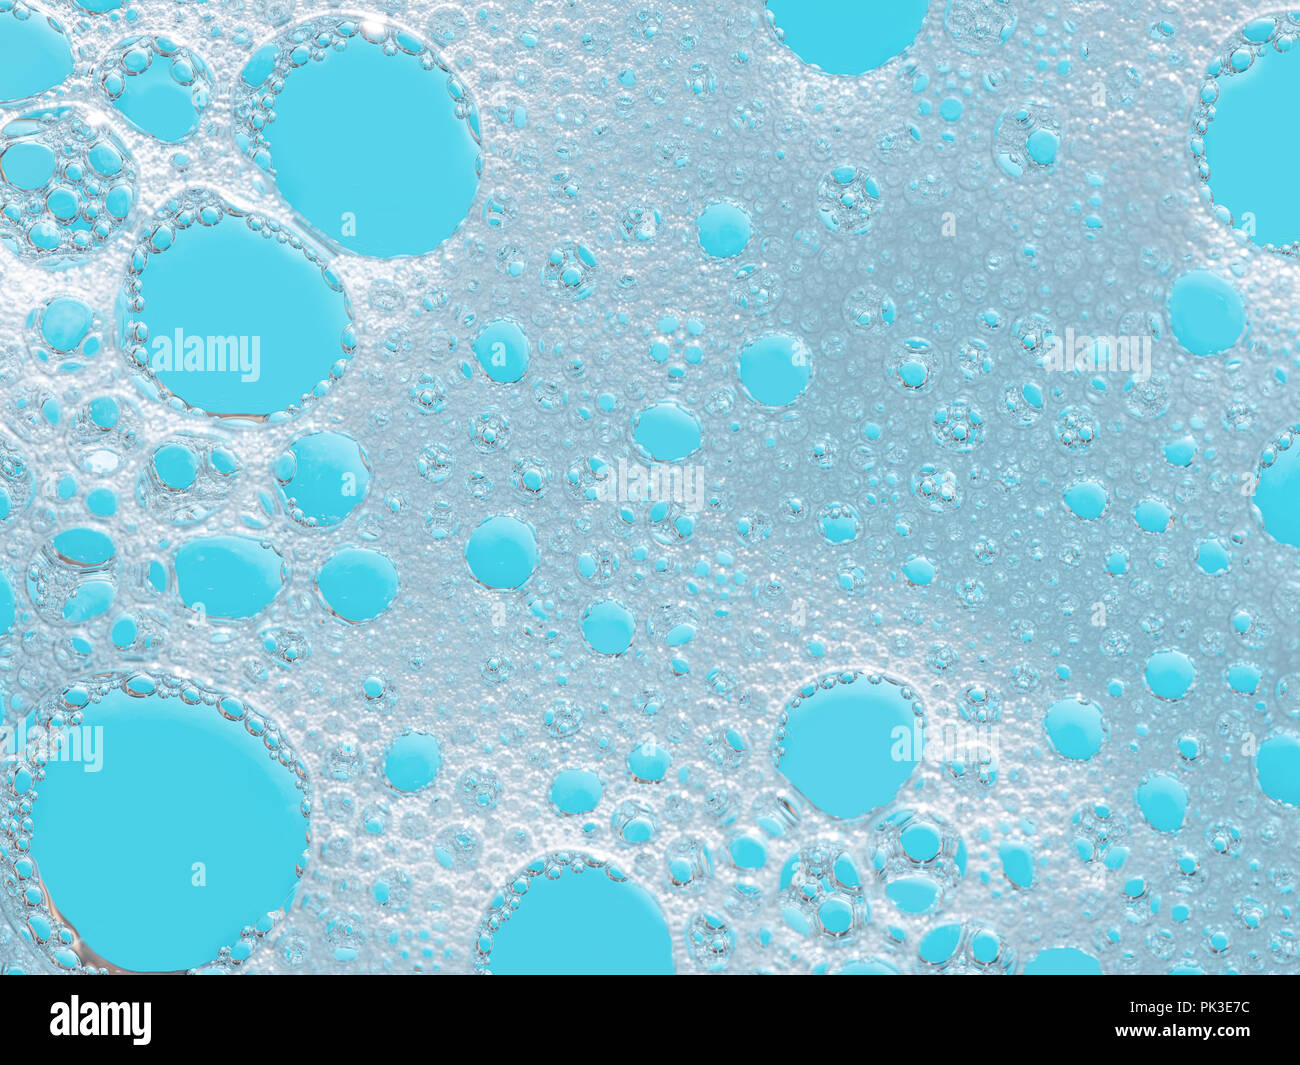 Turquoise froth, foamy background, soap, detergent bubbles on water. Stock Photo